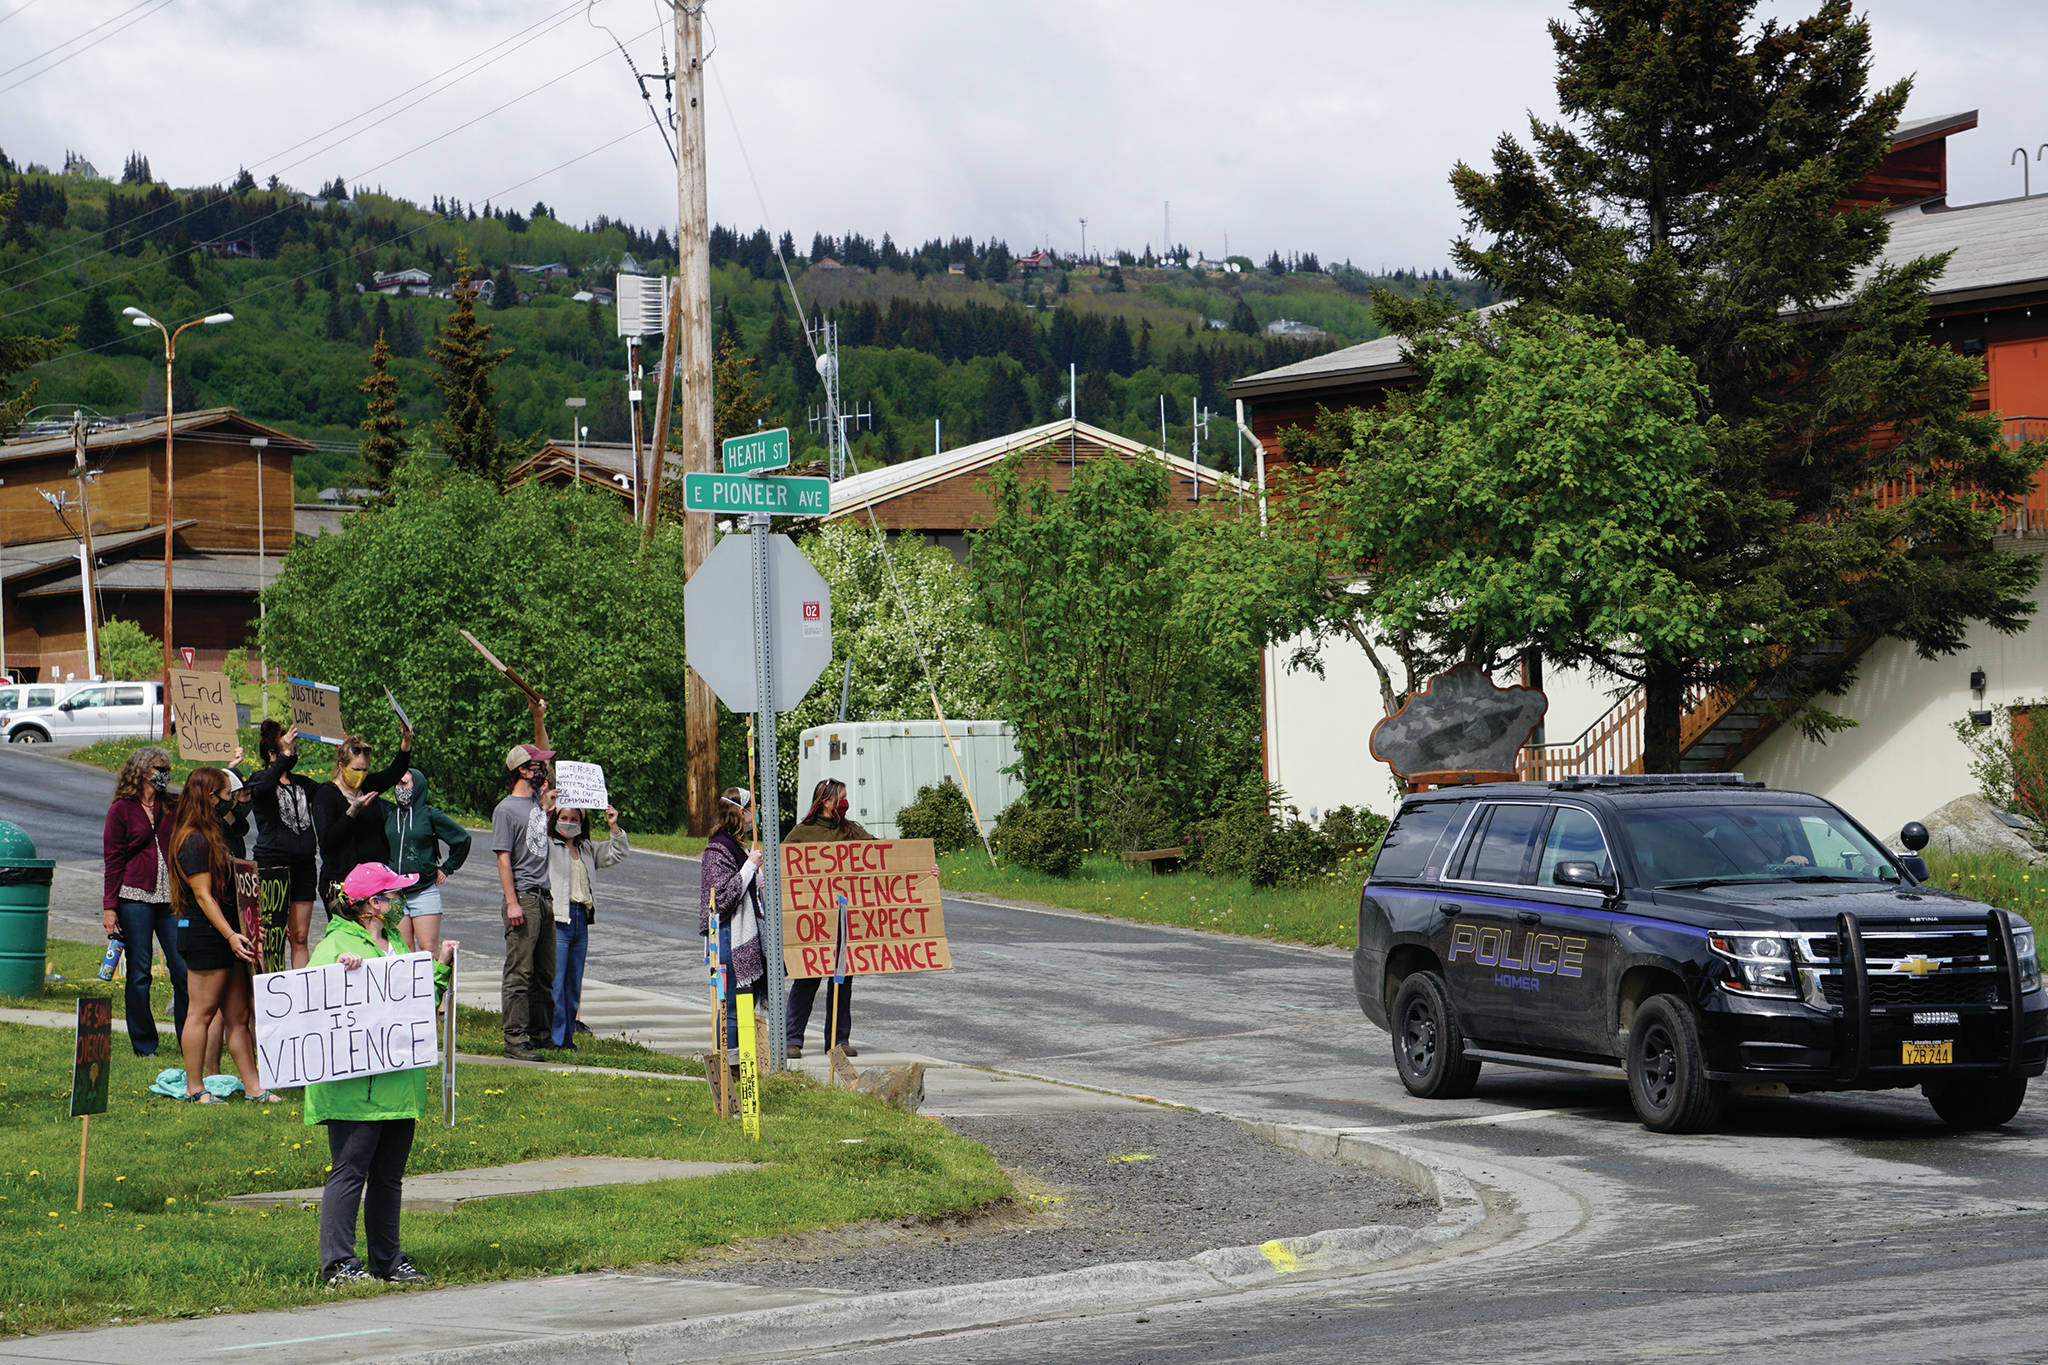 A Homer Police Department officer drives by a protest on Sunday, May 30, 2020, at WKFL Park in Homer, Alaska, in support of people of color who have been the subject of police violence, including George Floyd, a man who died May 25, 2020, in a police encounter in Minneapolis, Minnesota. Demonstrators at the Homer event also held signs that read “We (heart) our po po” — slang for police — and “Thank you, HPD.” (Photo by Michael Armstrong/Homer News)